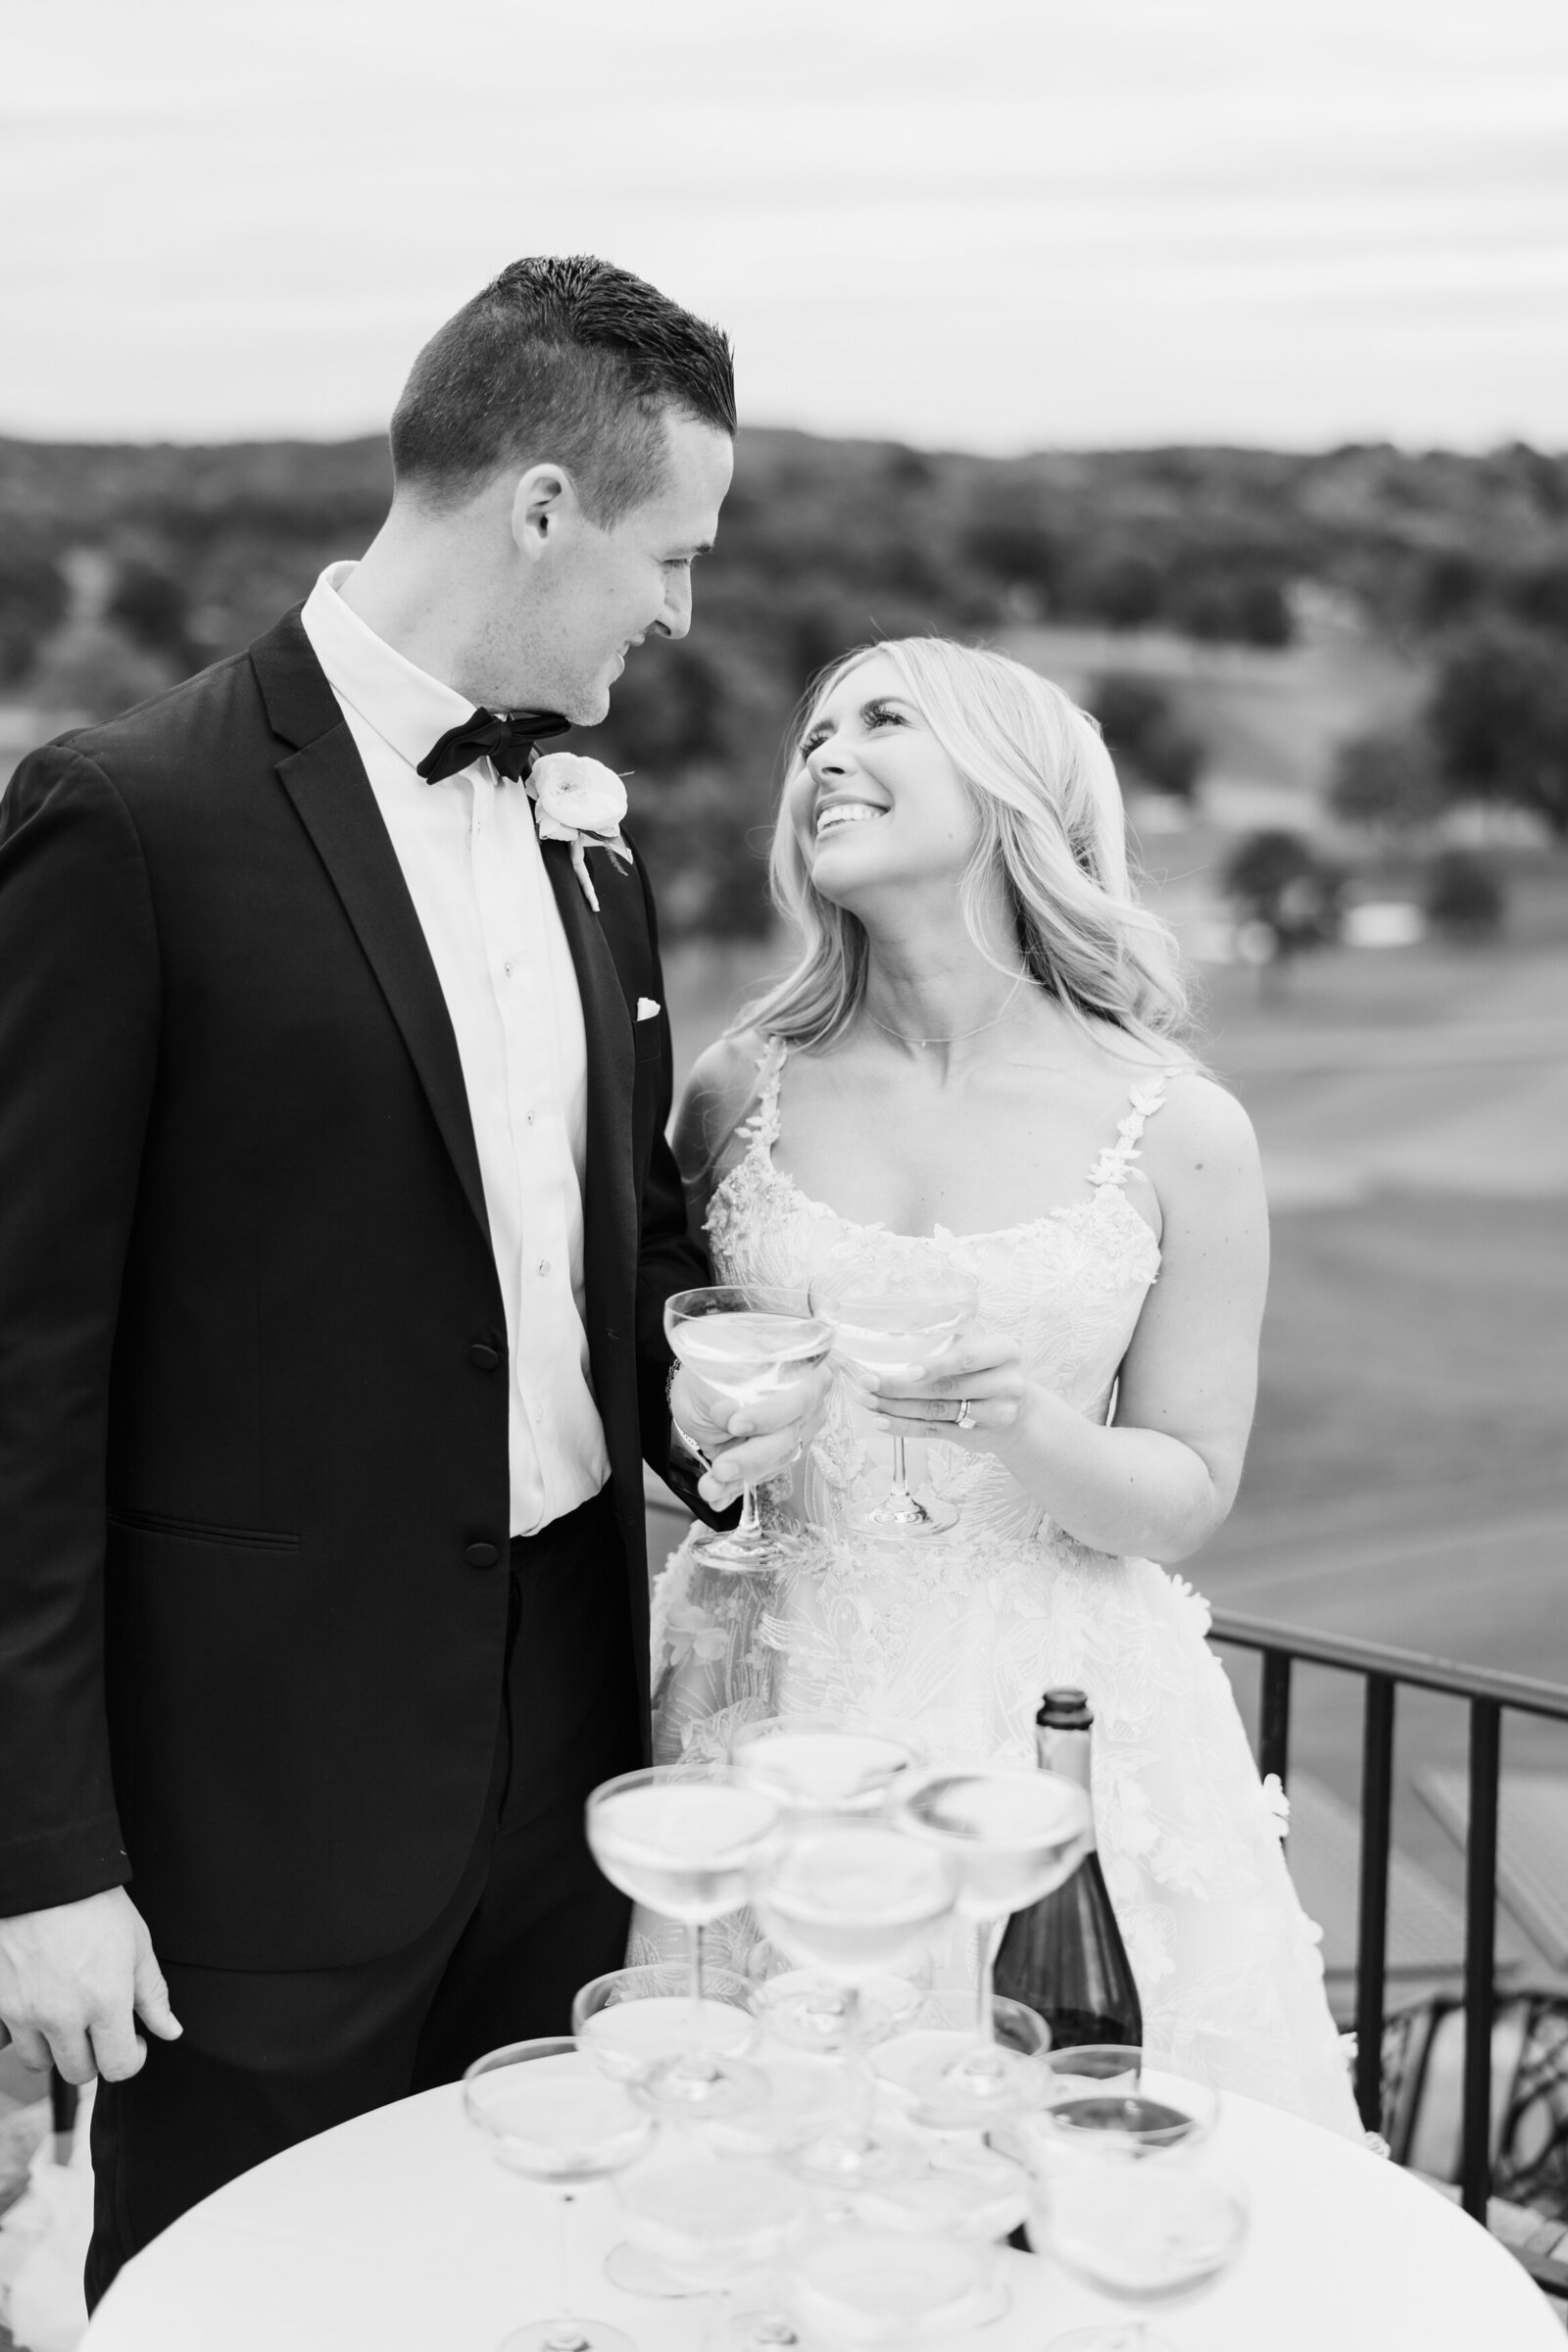 Bride and groom share glasses of champagne while overlooking a golf course